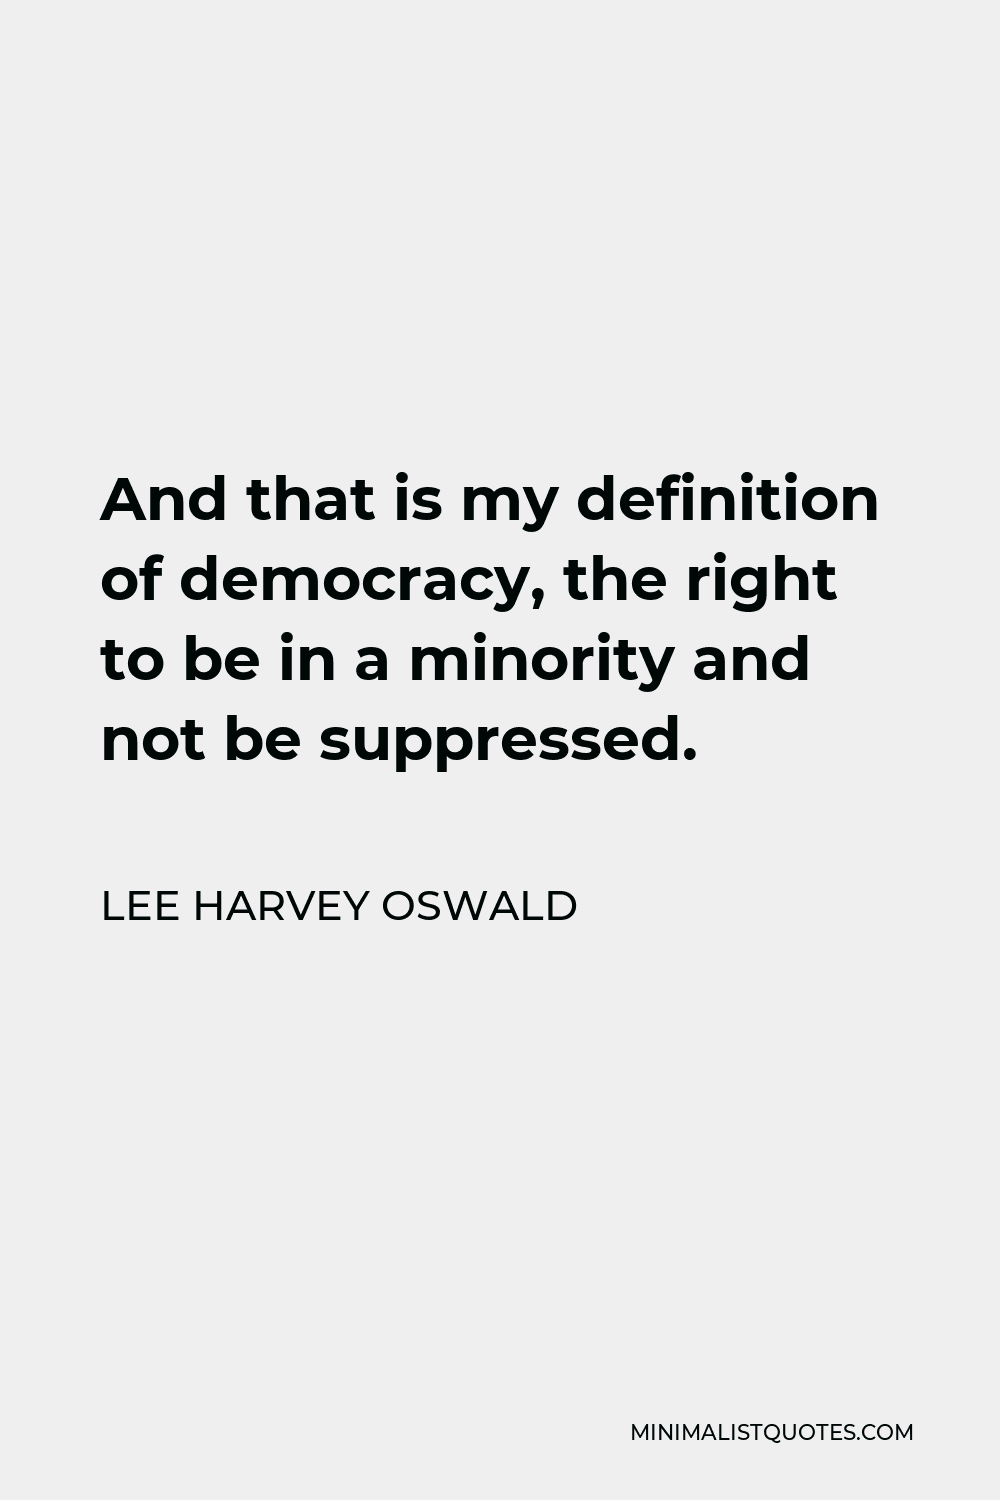 Lee Harvey Oswald Quote: And that is my definition of democracy, the right  to be in a minority and not be suppressed.